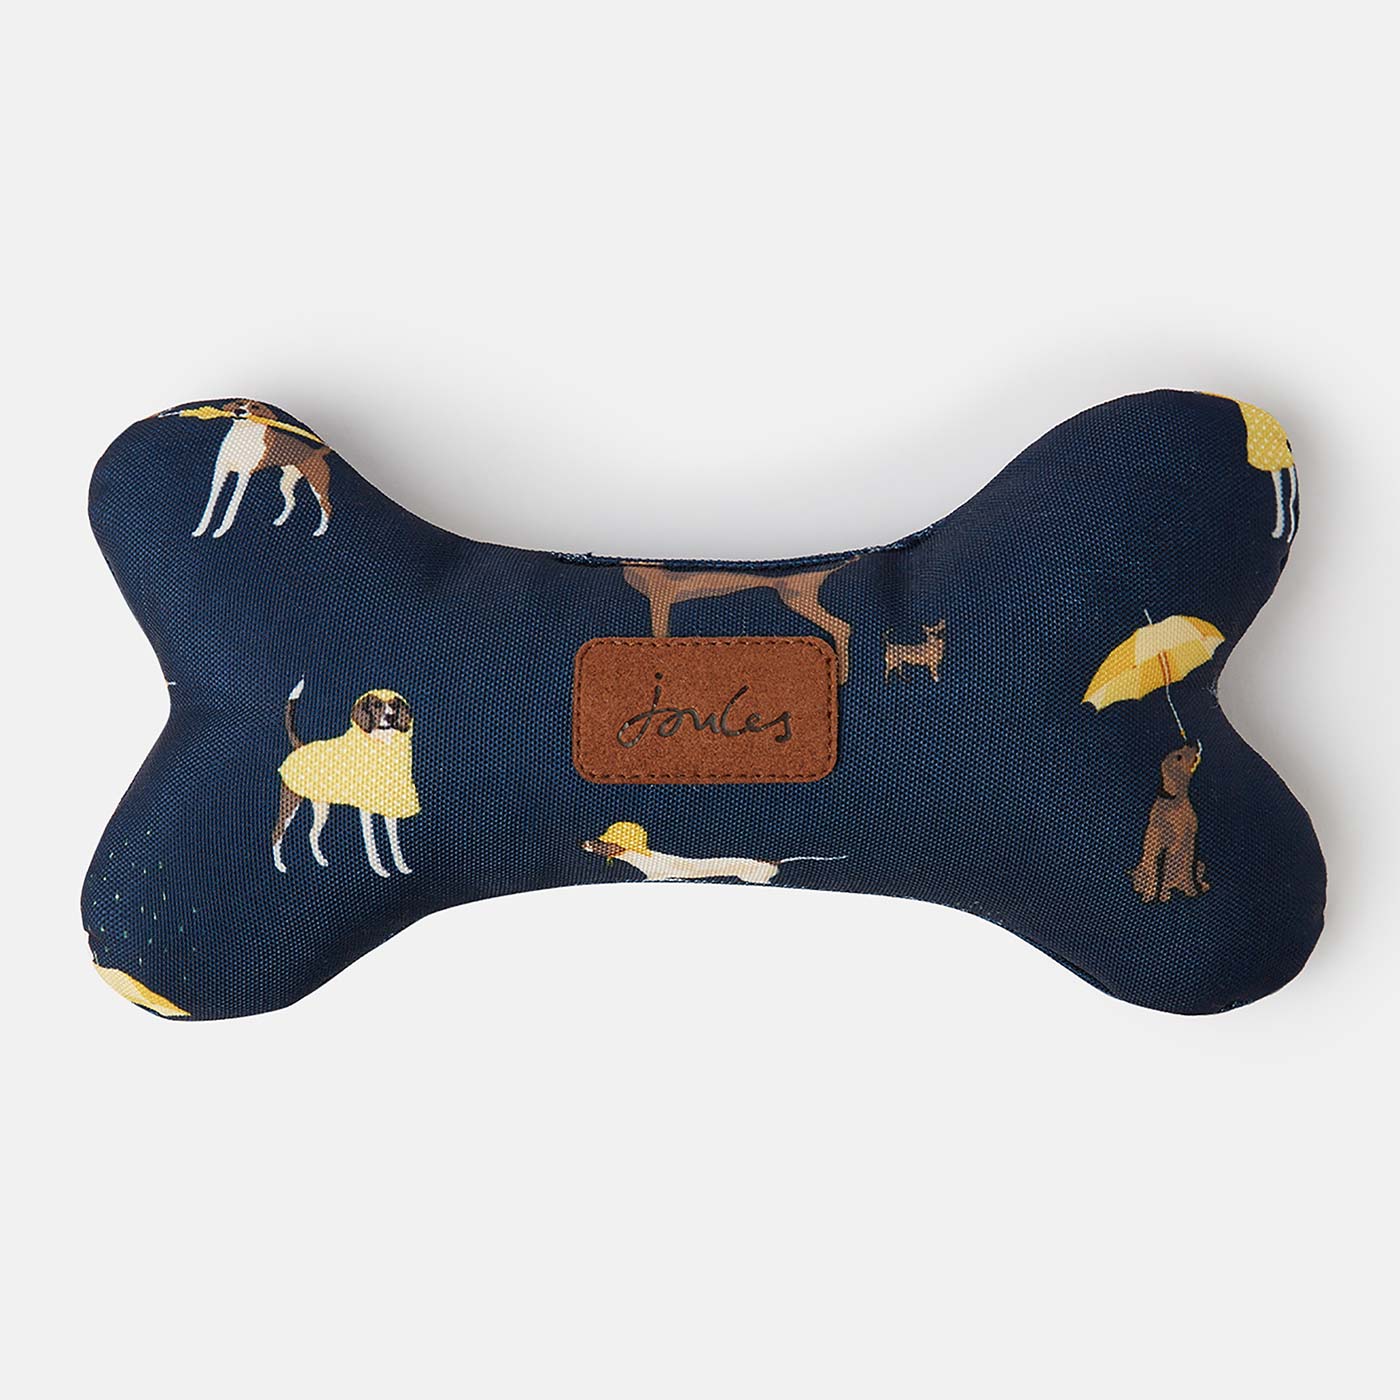 Joules Large Canvas Comfort Pet Bone Toy in 'It's Raining Dogs'